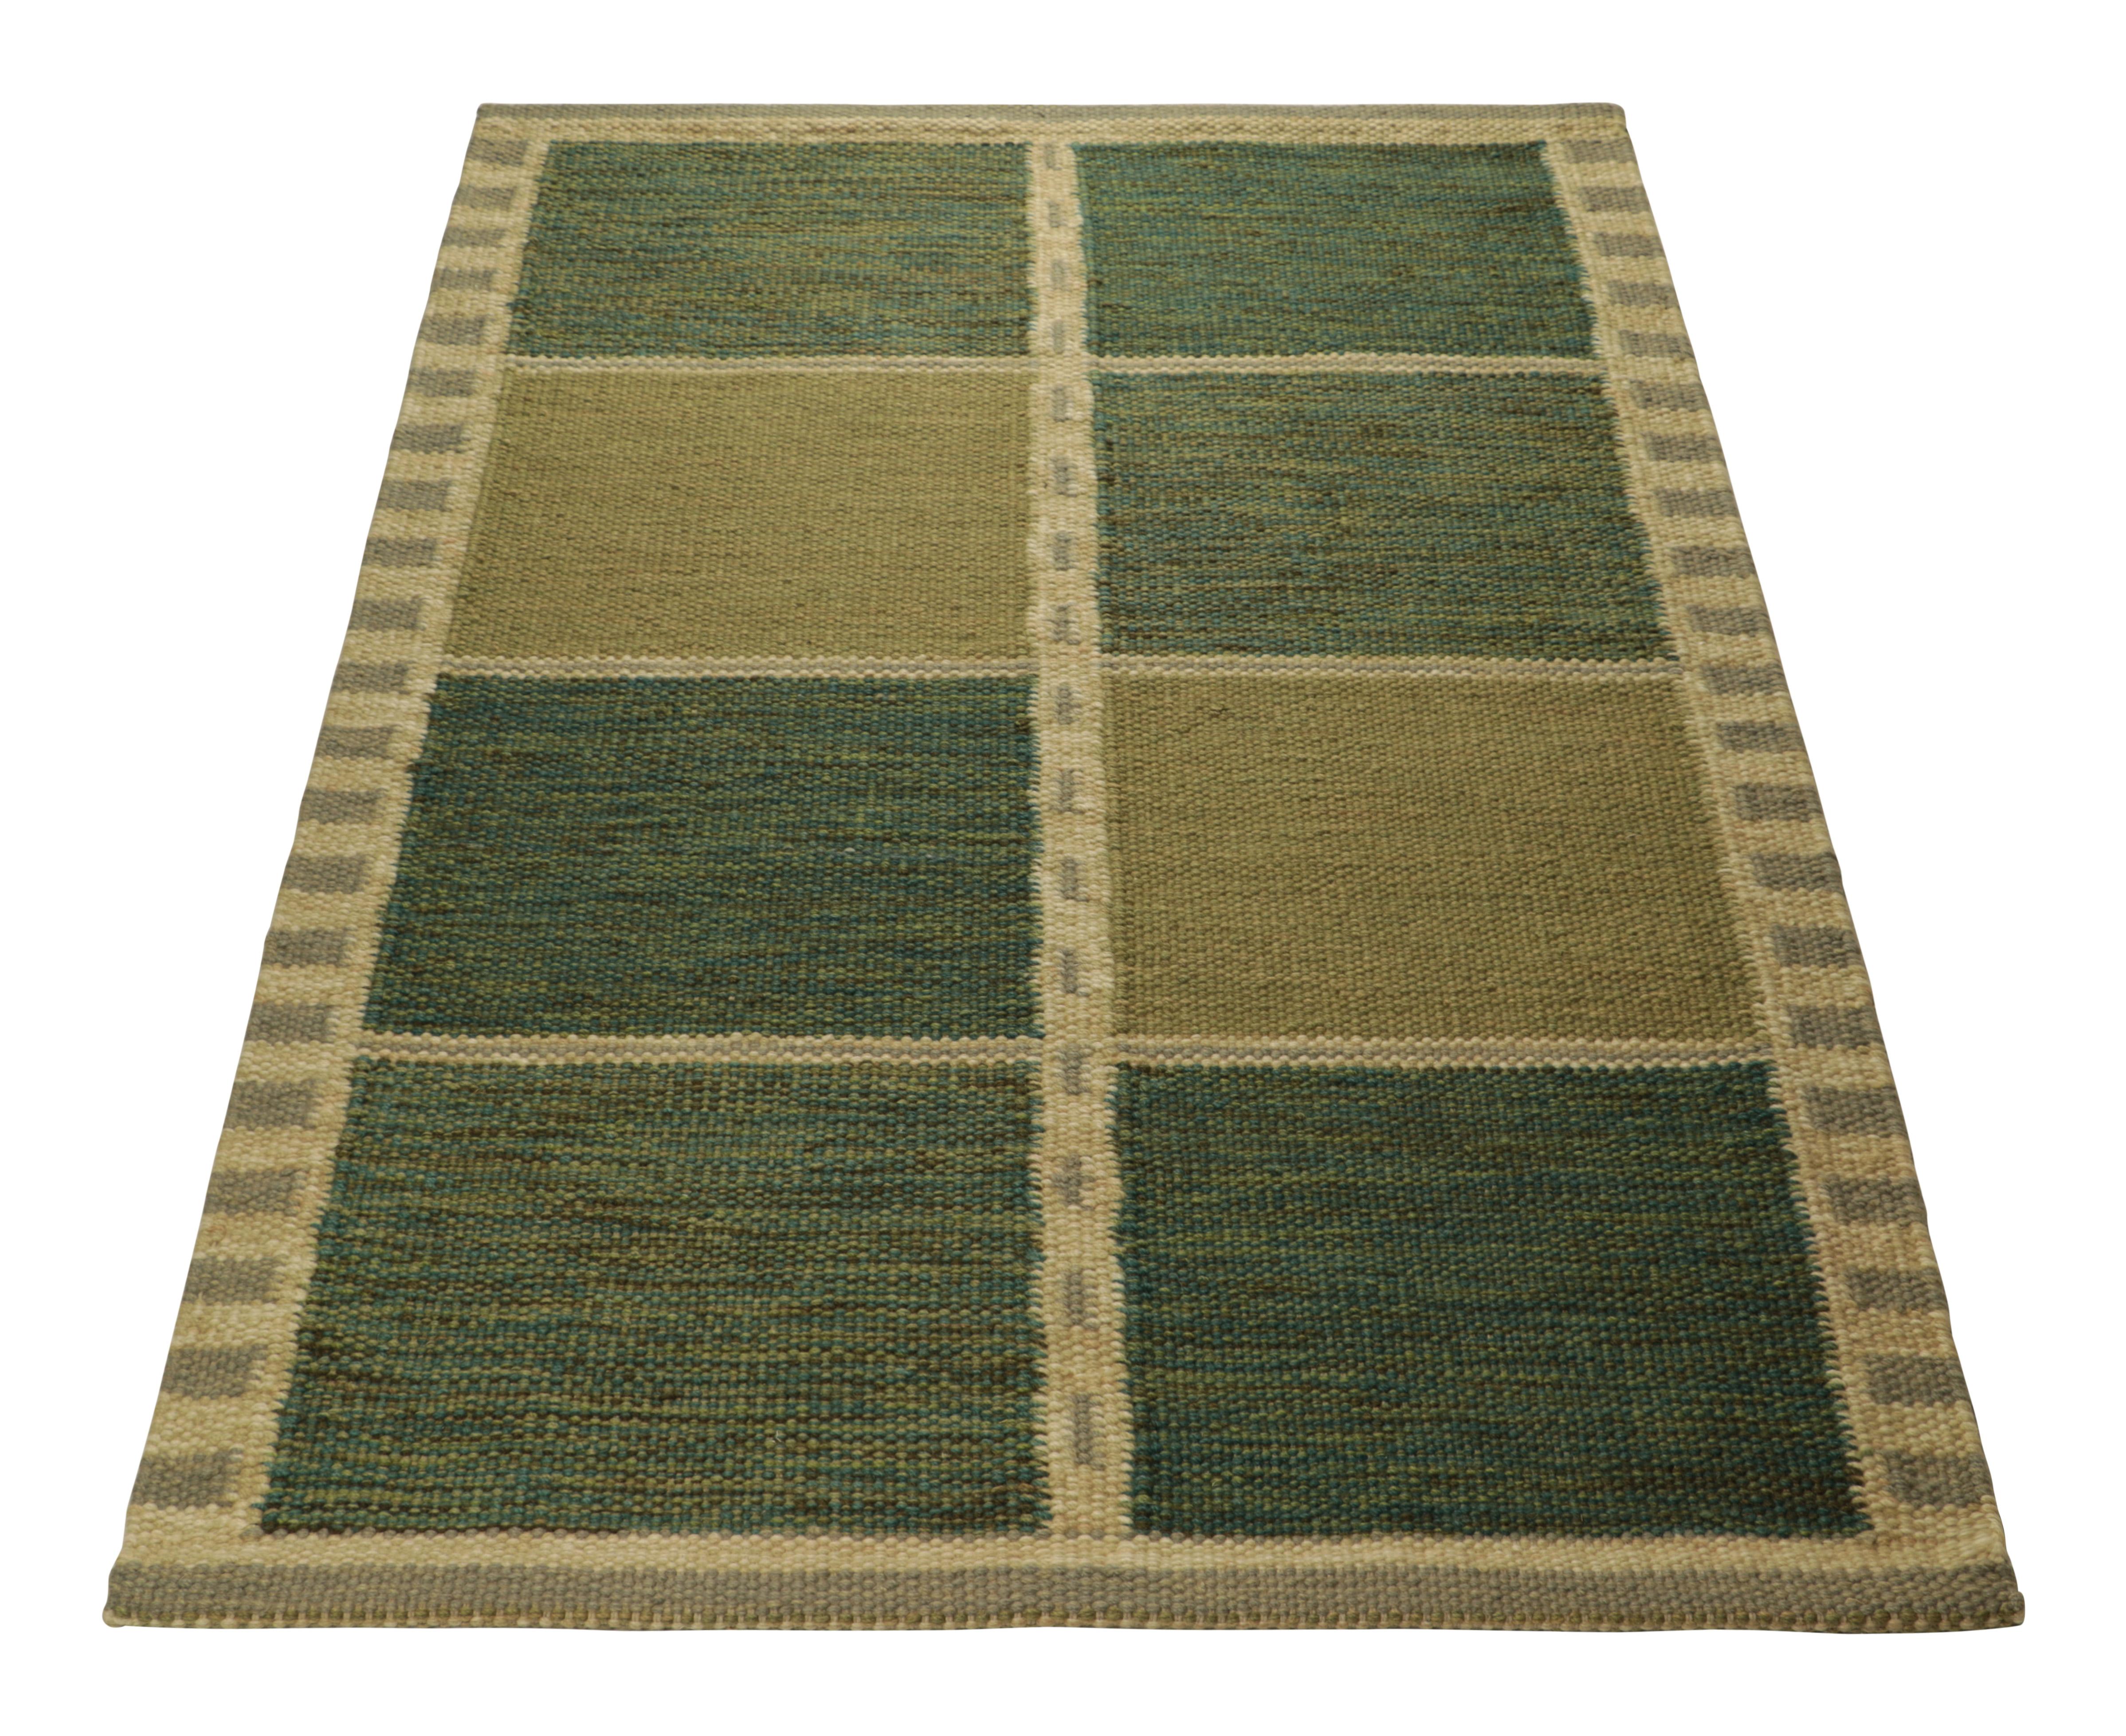 Indian Rug & Kilim’s Scandinavian Style Rug in Green and Beige, with Geometric Patterns For Sale